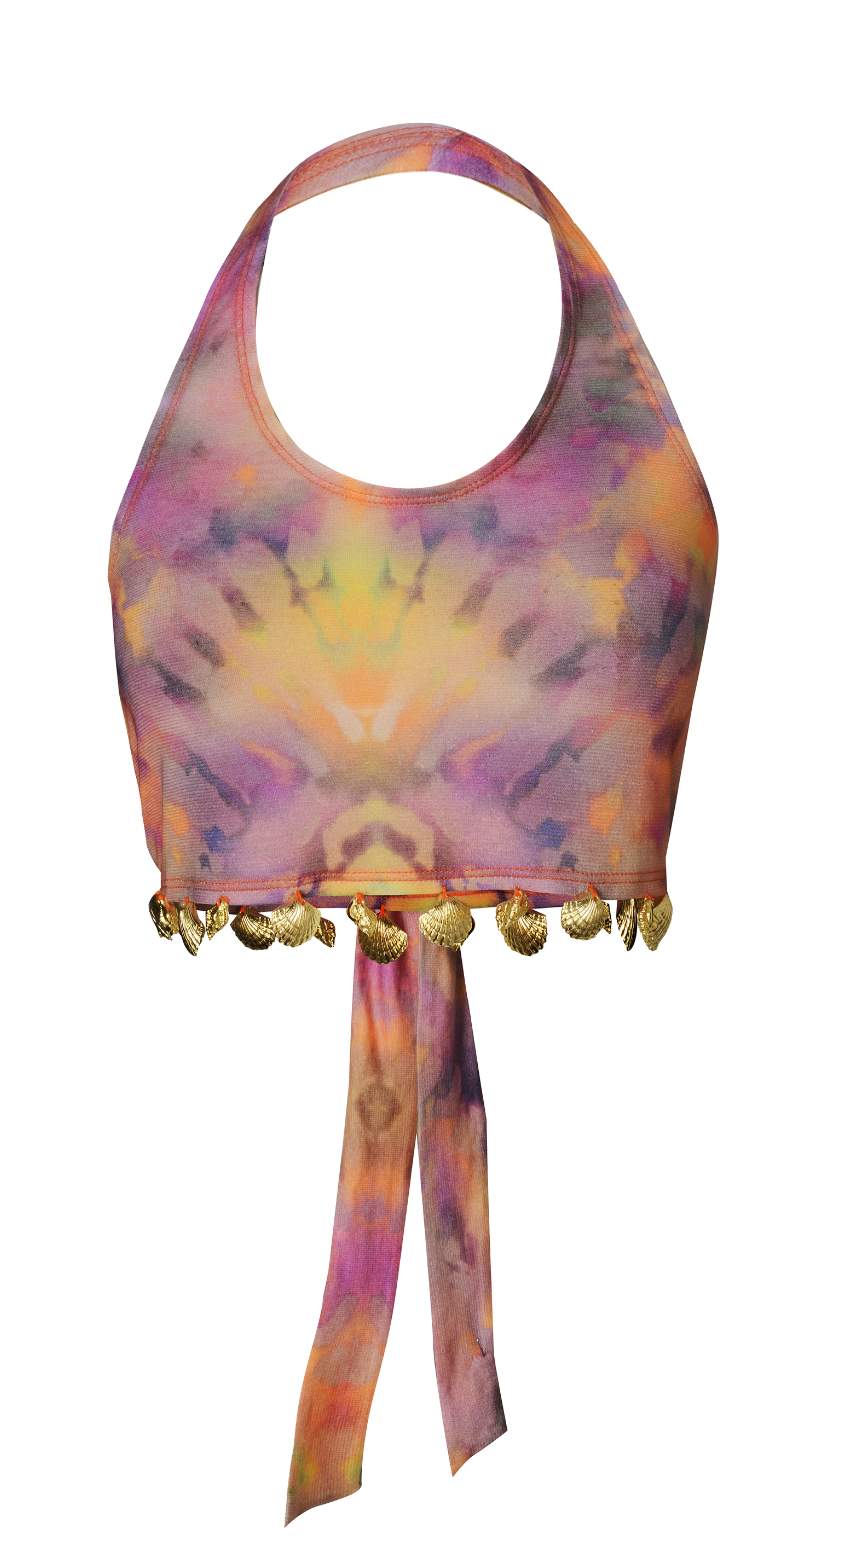 Printed Shell Top